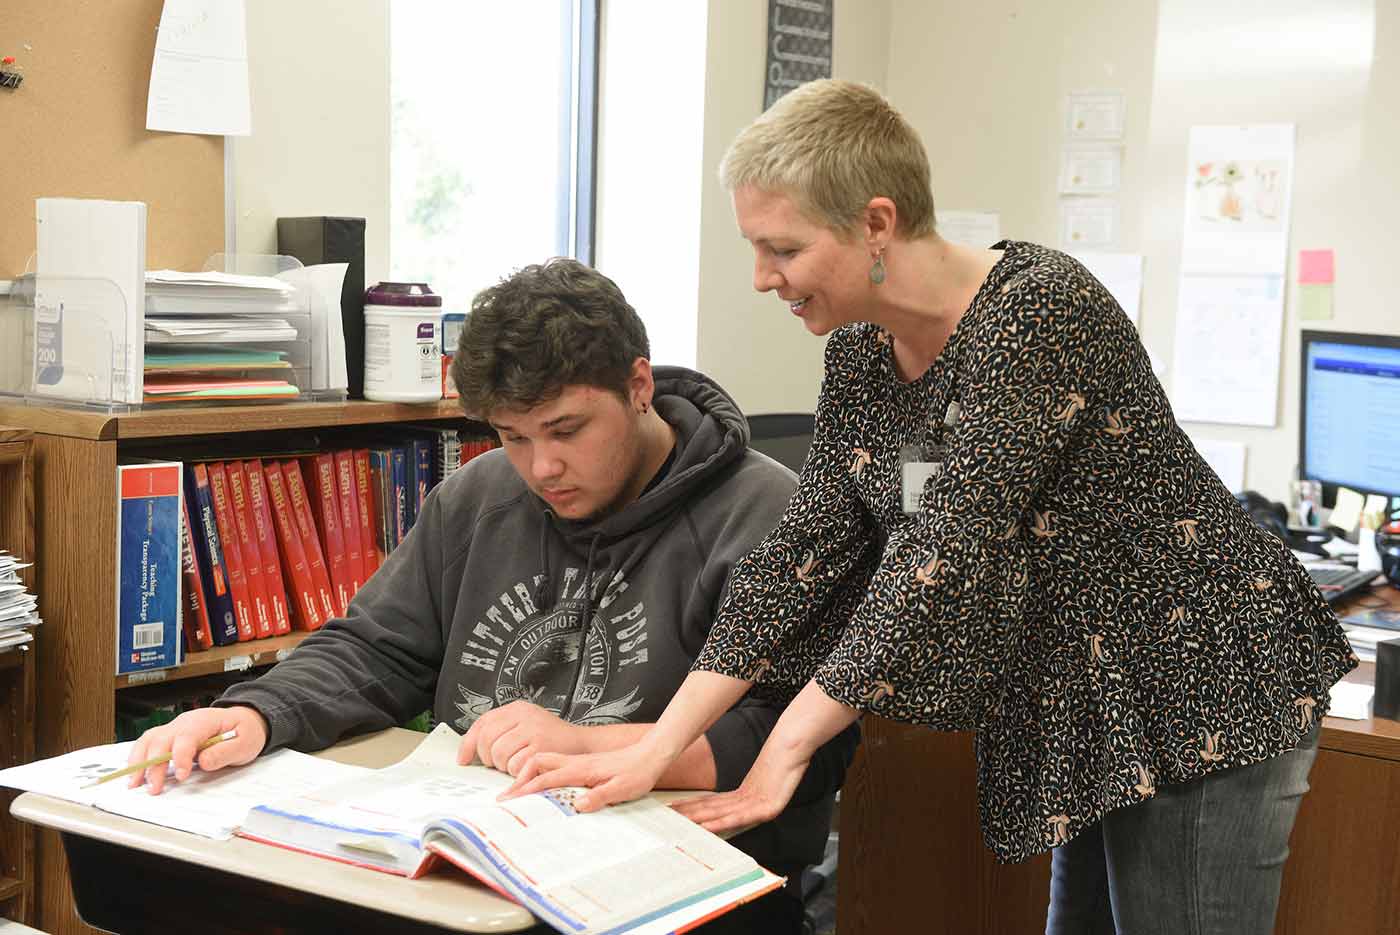 Teacher works one on one with Natchaug student while they learn from a textbook